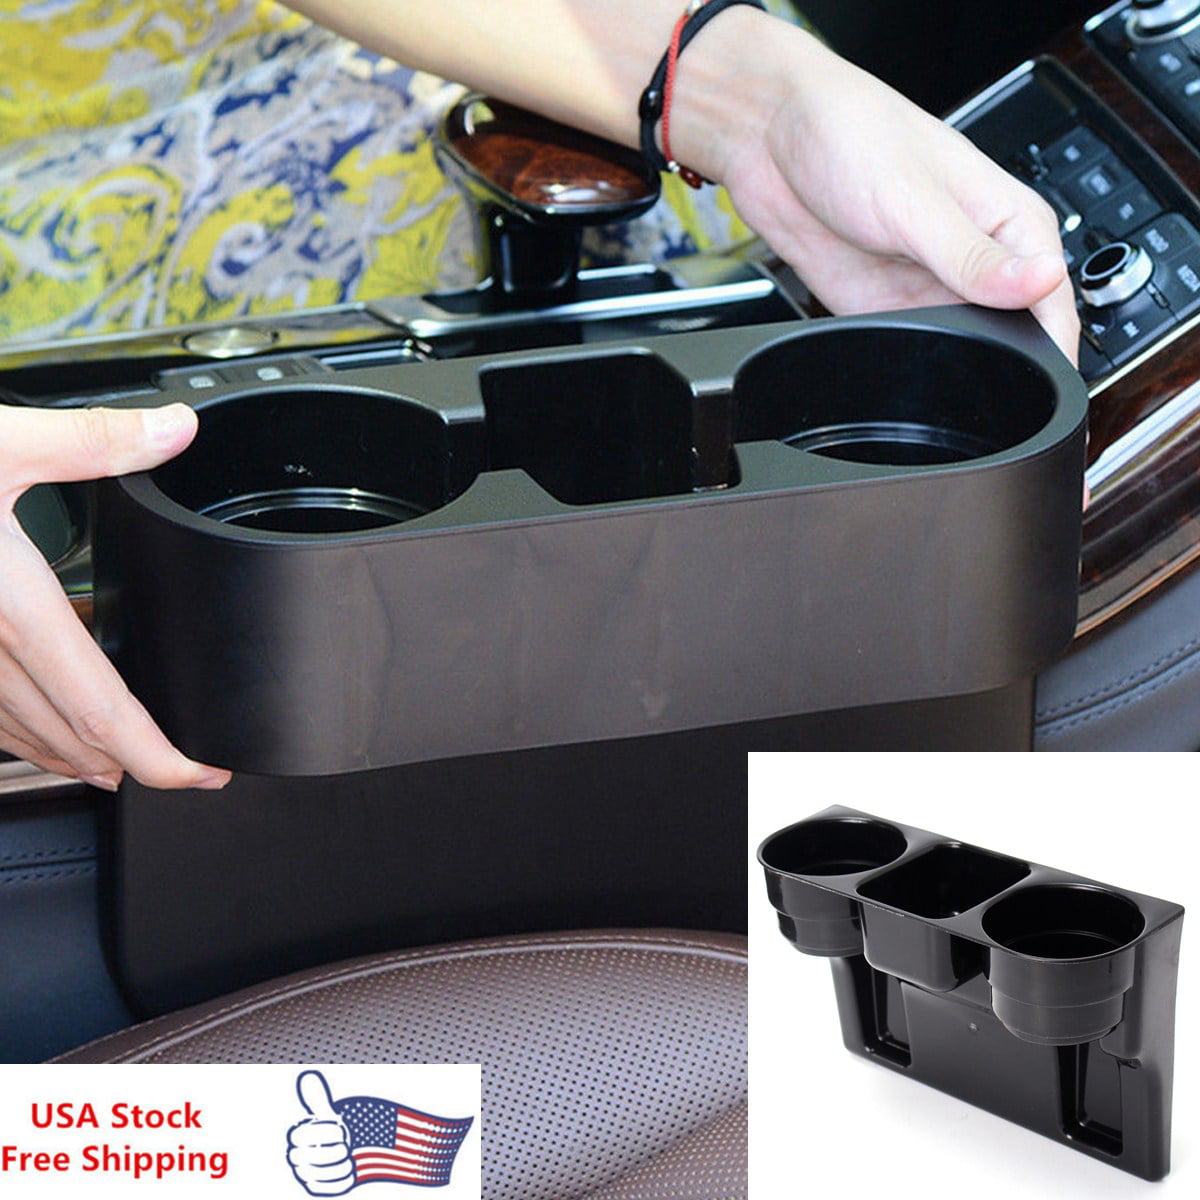 Universal Simple Car Vehicle Beverage Bottle Can Drink Cup Holder Stand Clip Shelf for Car Truck Automotive Vehicle Car Water cup holder